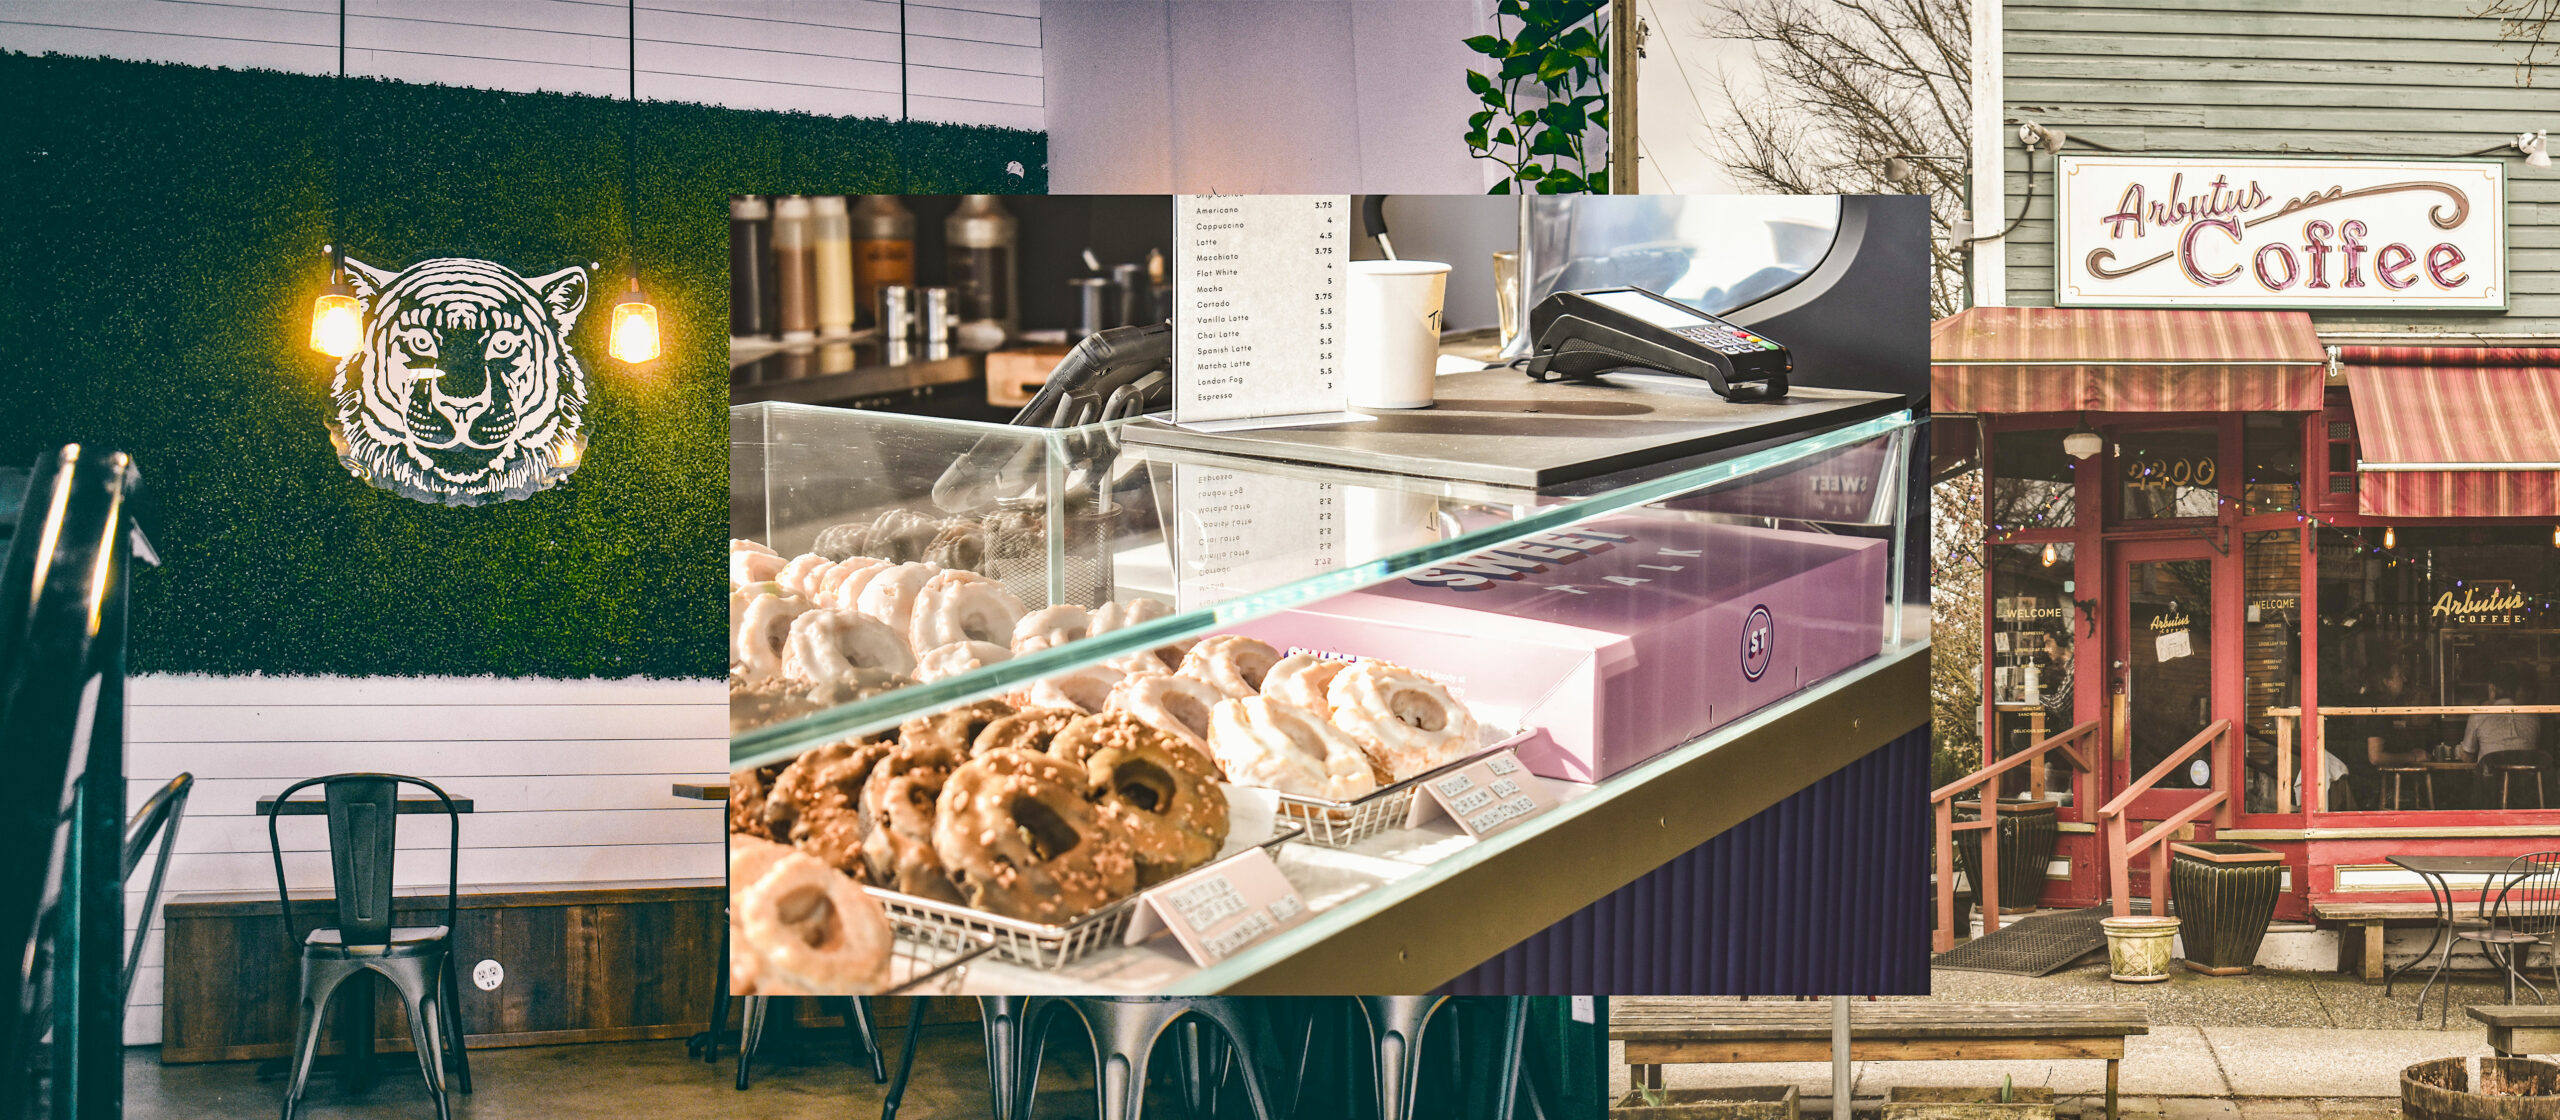 A collage of photos from some of the cafes and bakeries mentioned in this piece, including sugar-coated donuts on display and a wall in a cafe with fake grass lining it and a drawing on a tiger.